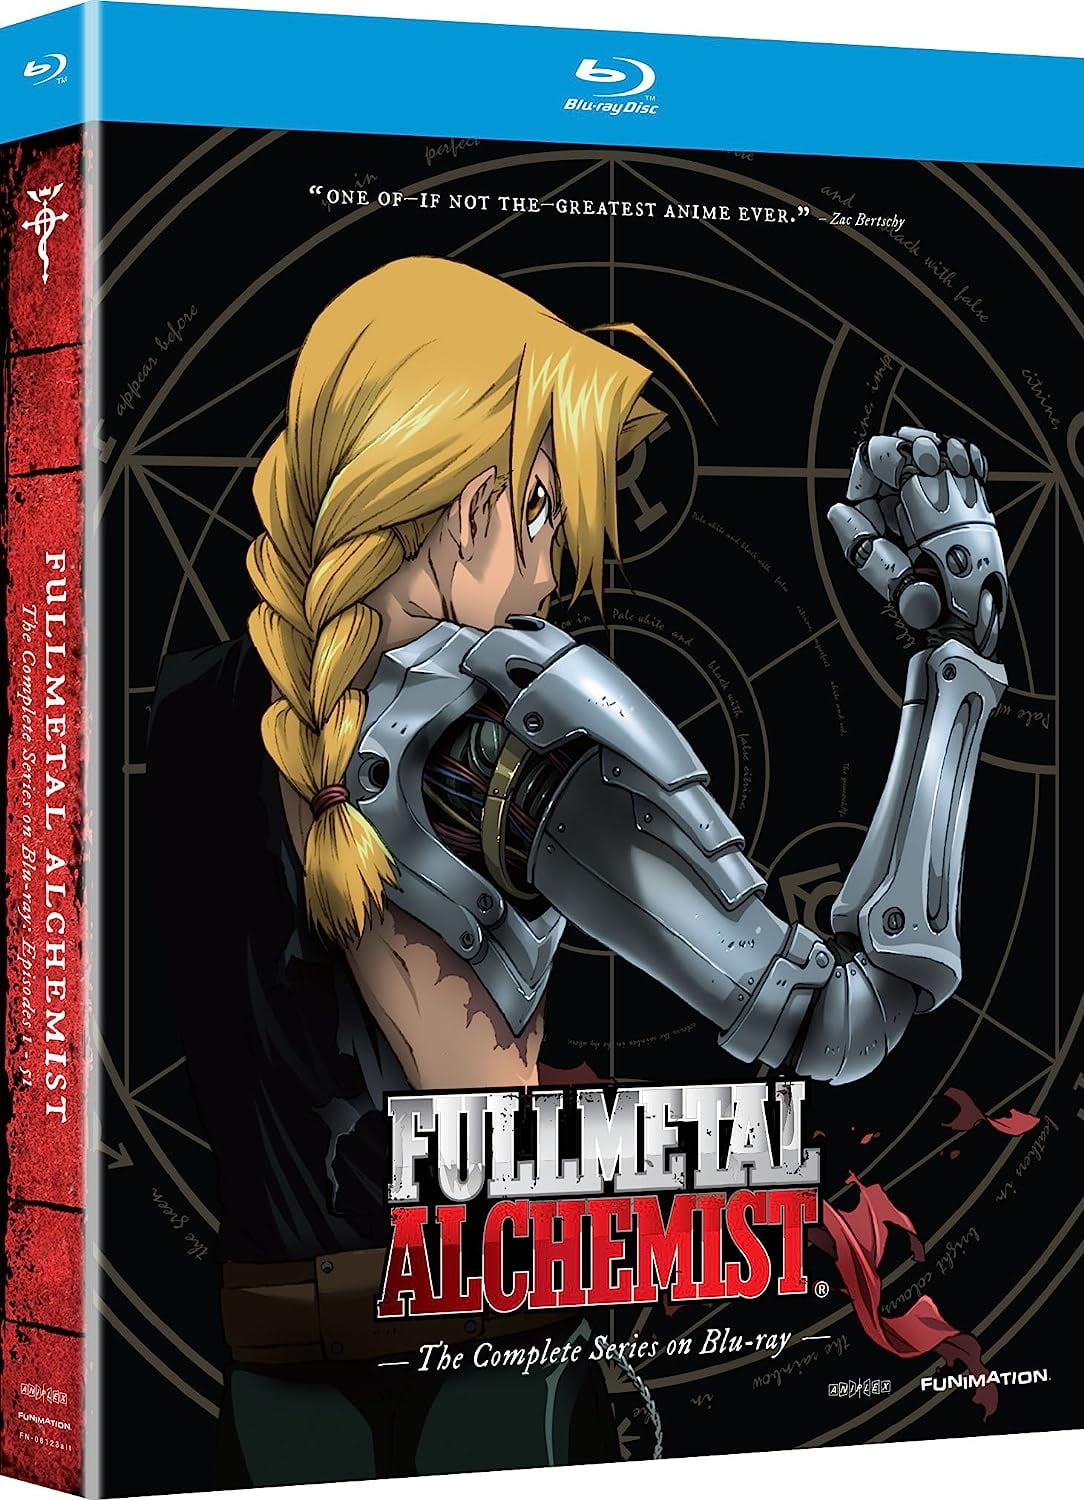 Fullmetal Alchemist: The Complete Series on Blu-ray Episodes1-51 (Blu-ray)  